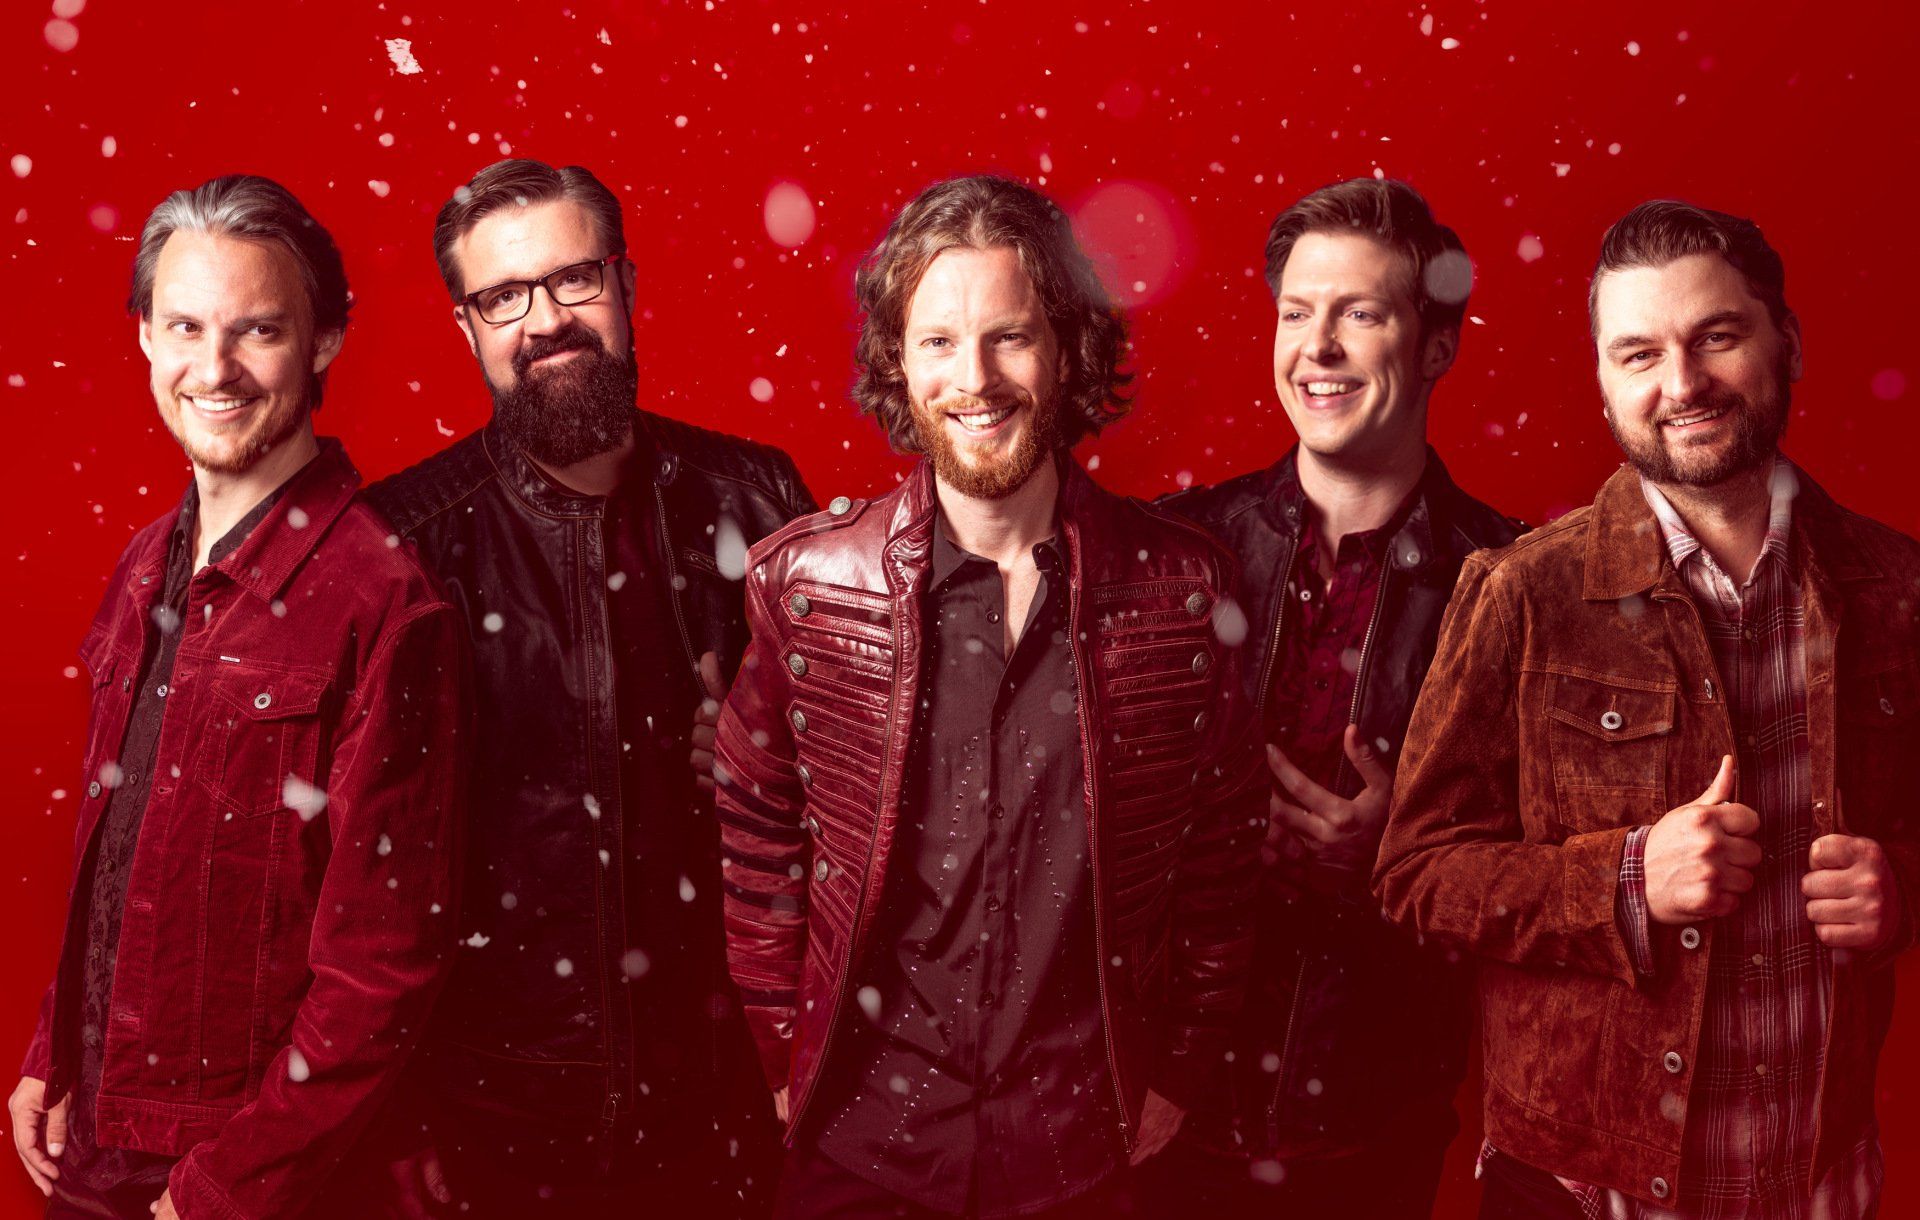 Home Free returns to The Mansion Theatre with their Warmest Winter Holiday Tour